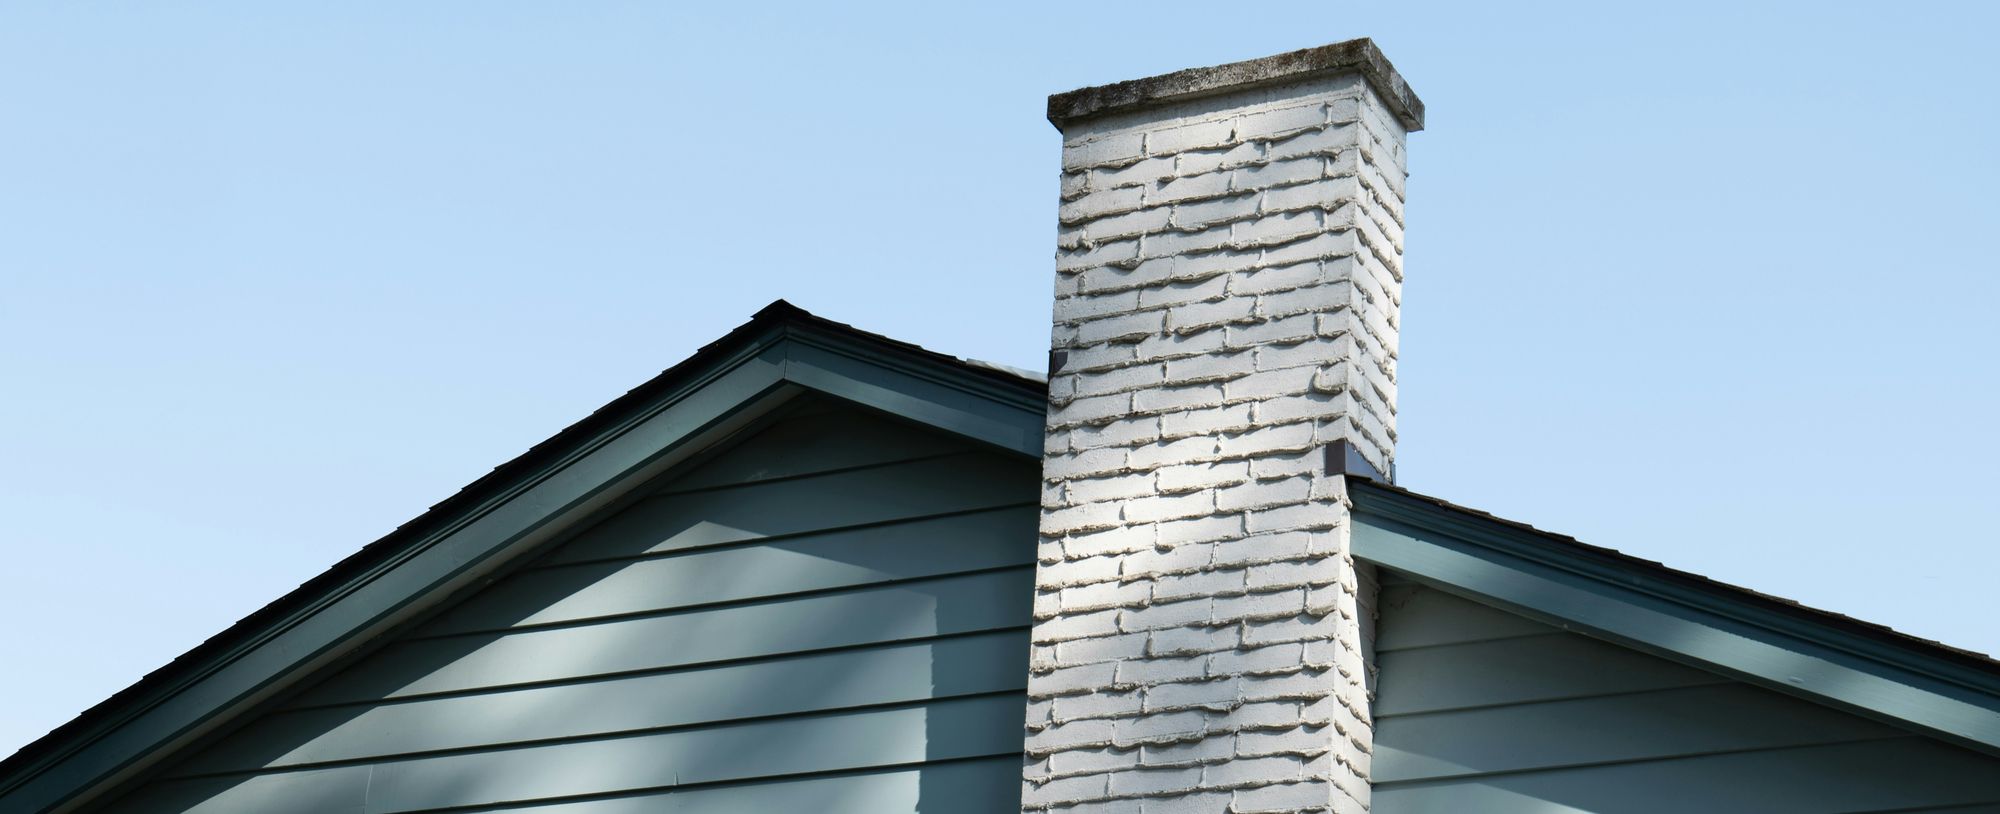 Checklist for Chimney Replacement